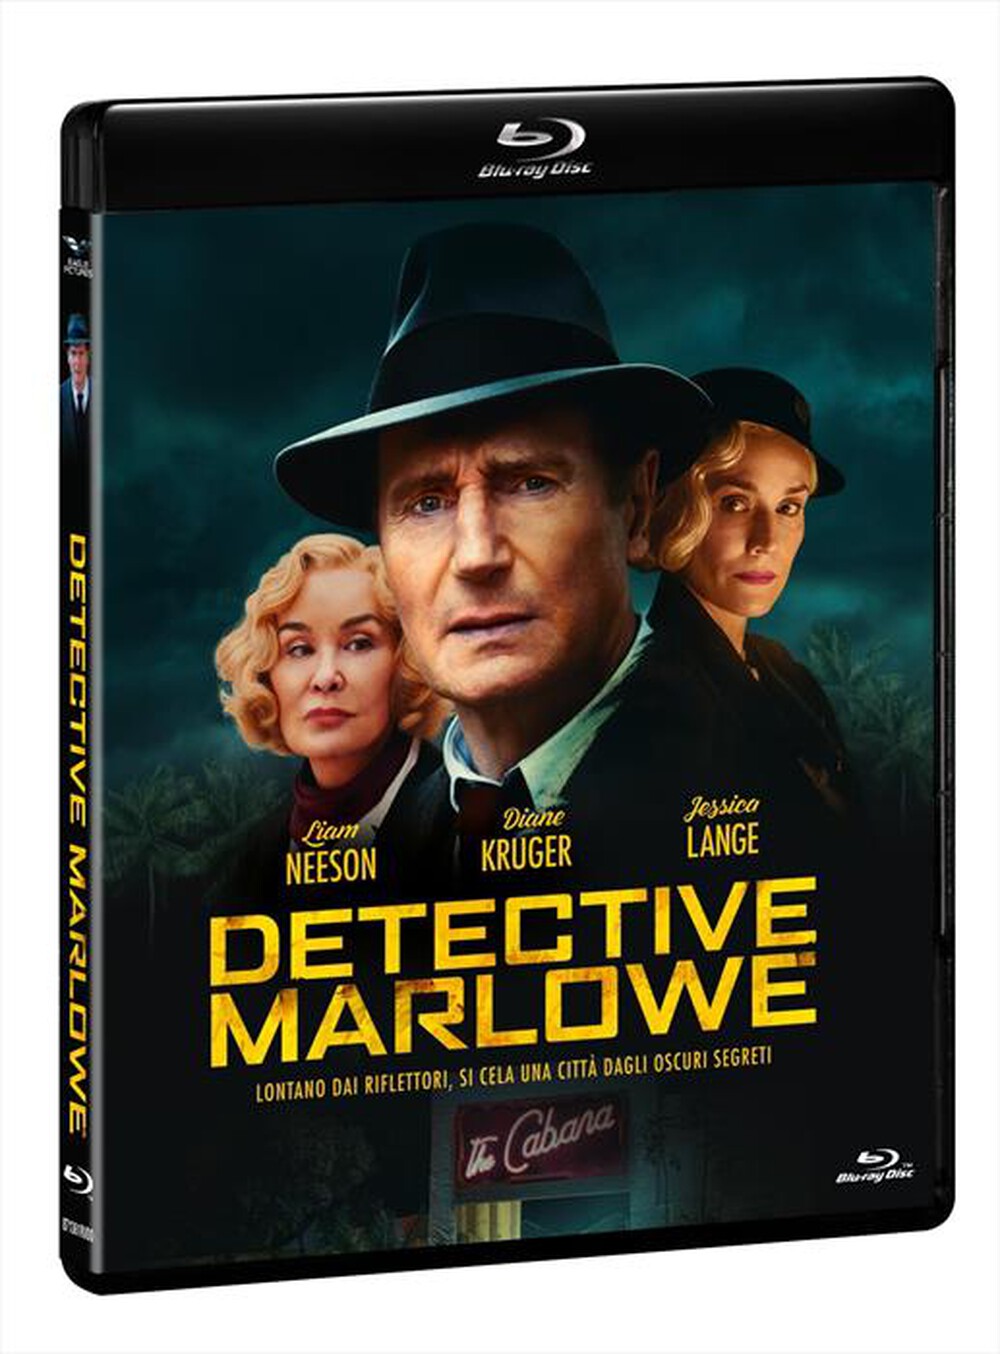 "EAGLE PICTURES - Detective Marlowe"